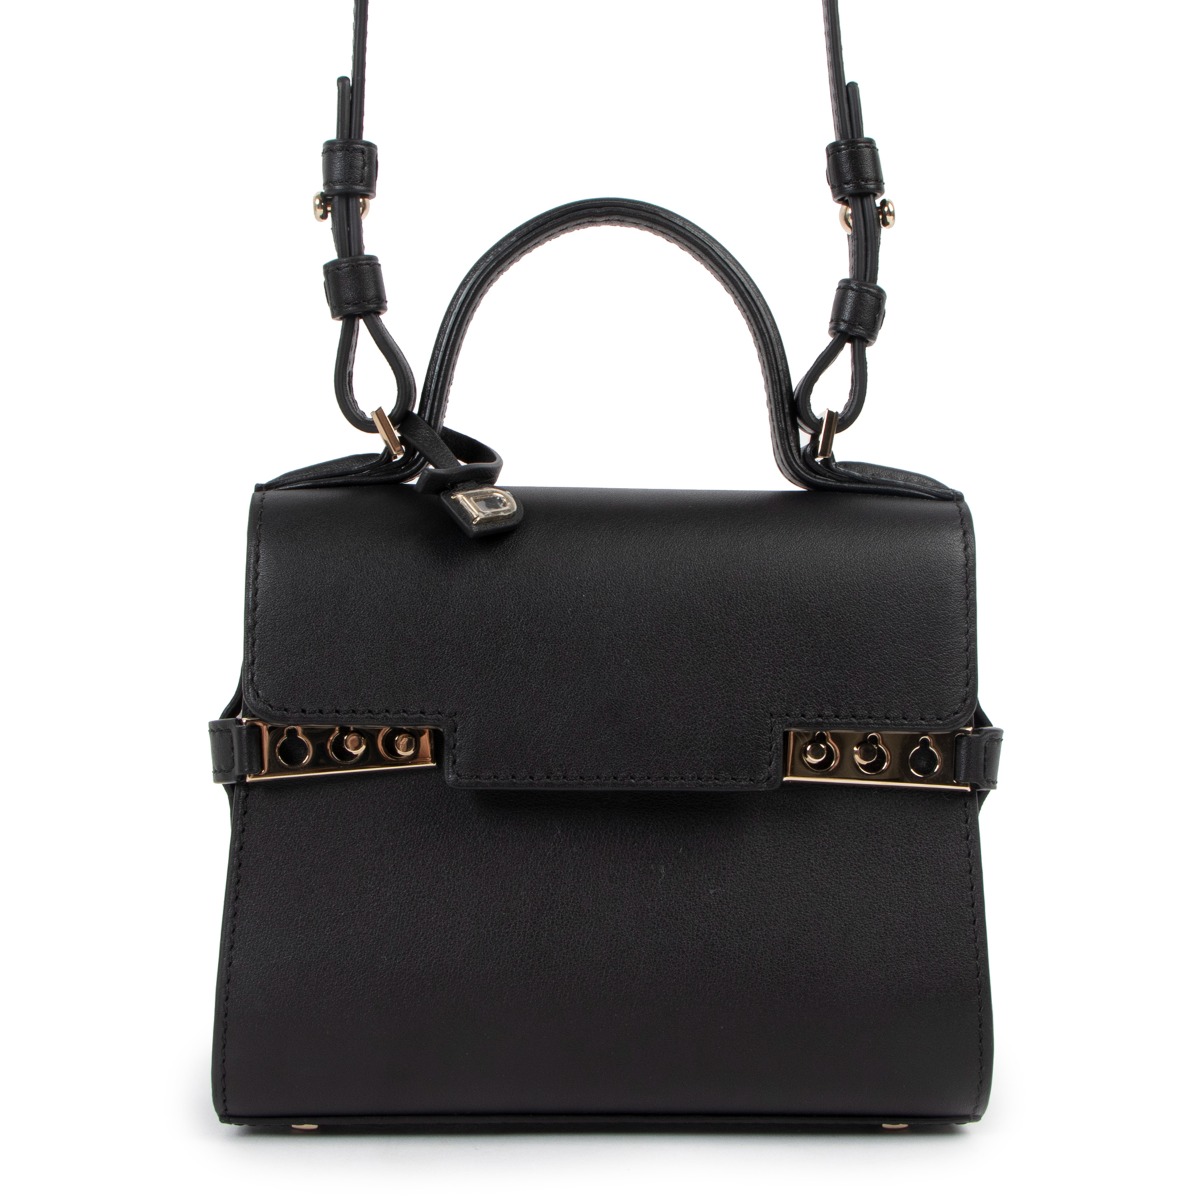 Delvaux (Tempete Micro) 95% new. Size16.5cm,14cm high, 女裝, 手袋